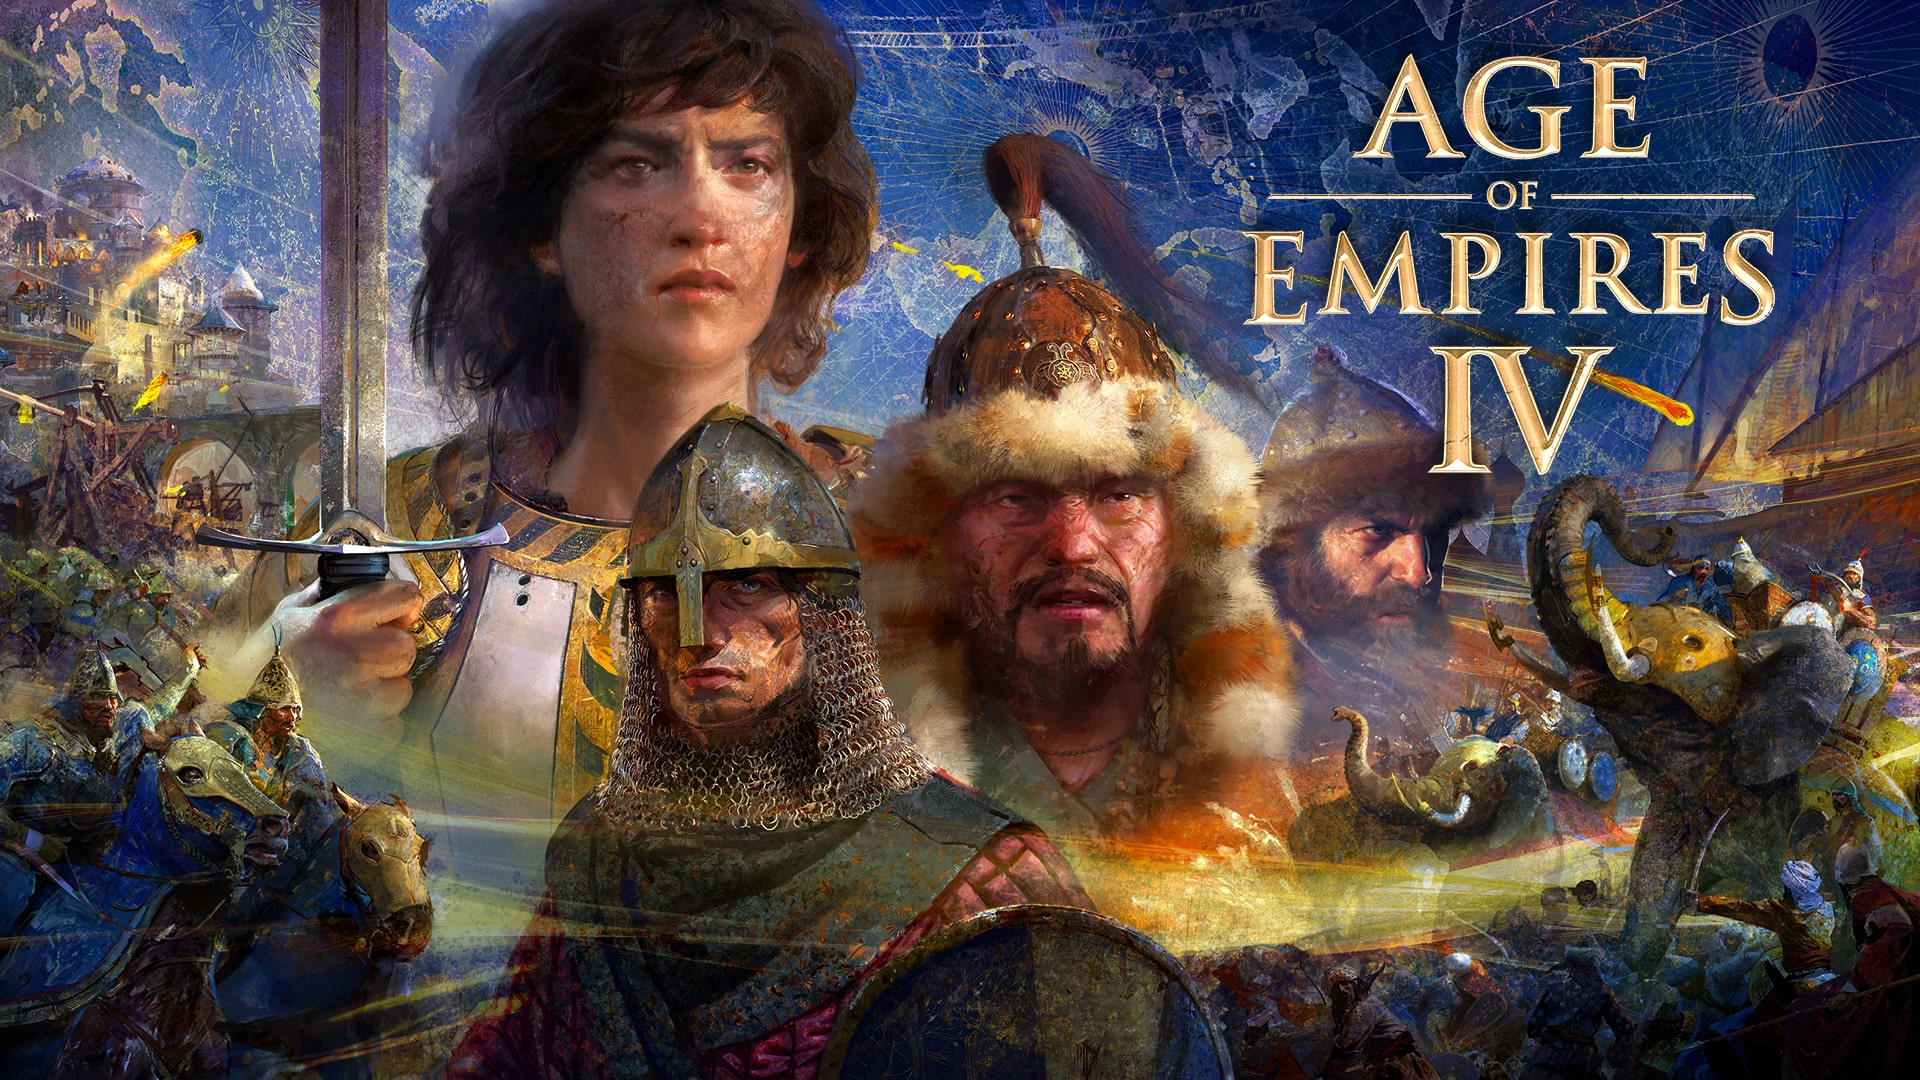 In-game screenshot of Age of Empires IV showcasing historical civilizations and battles